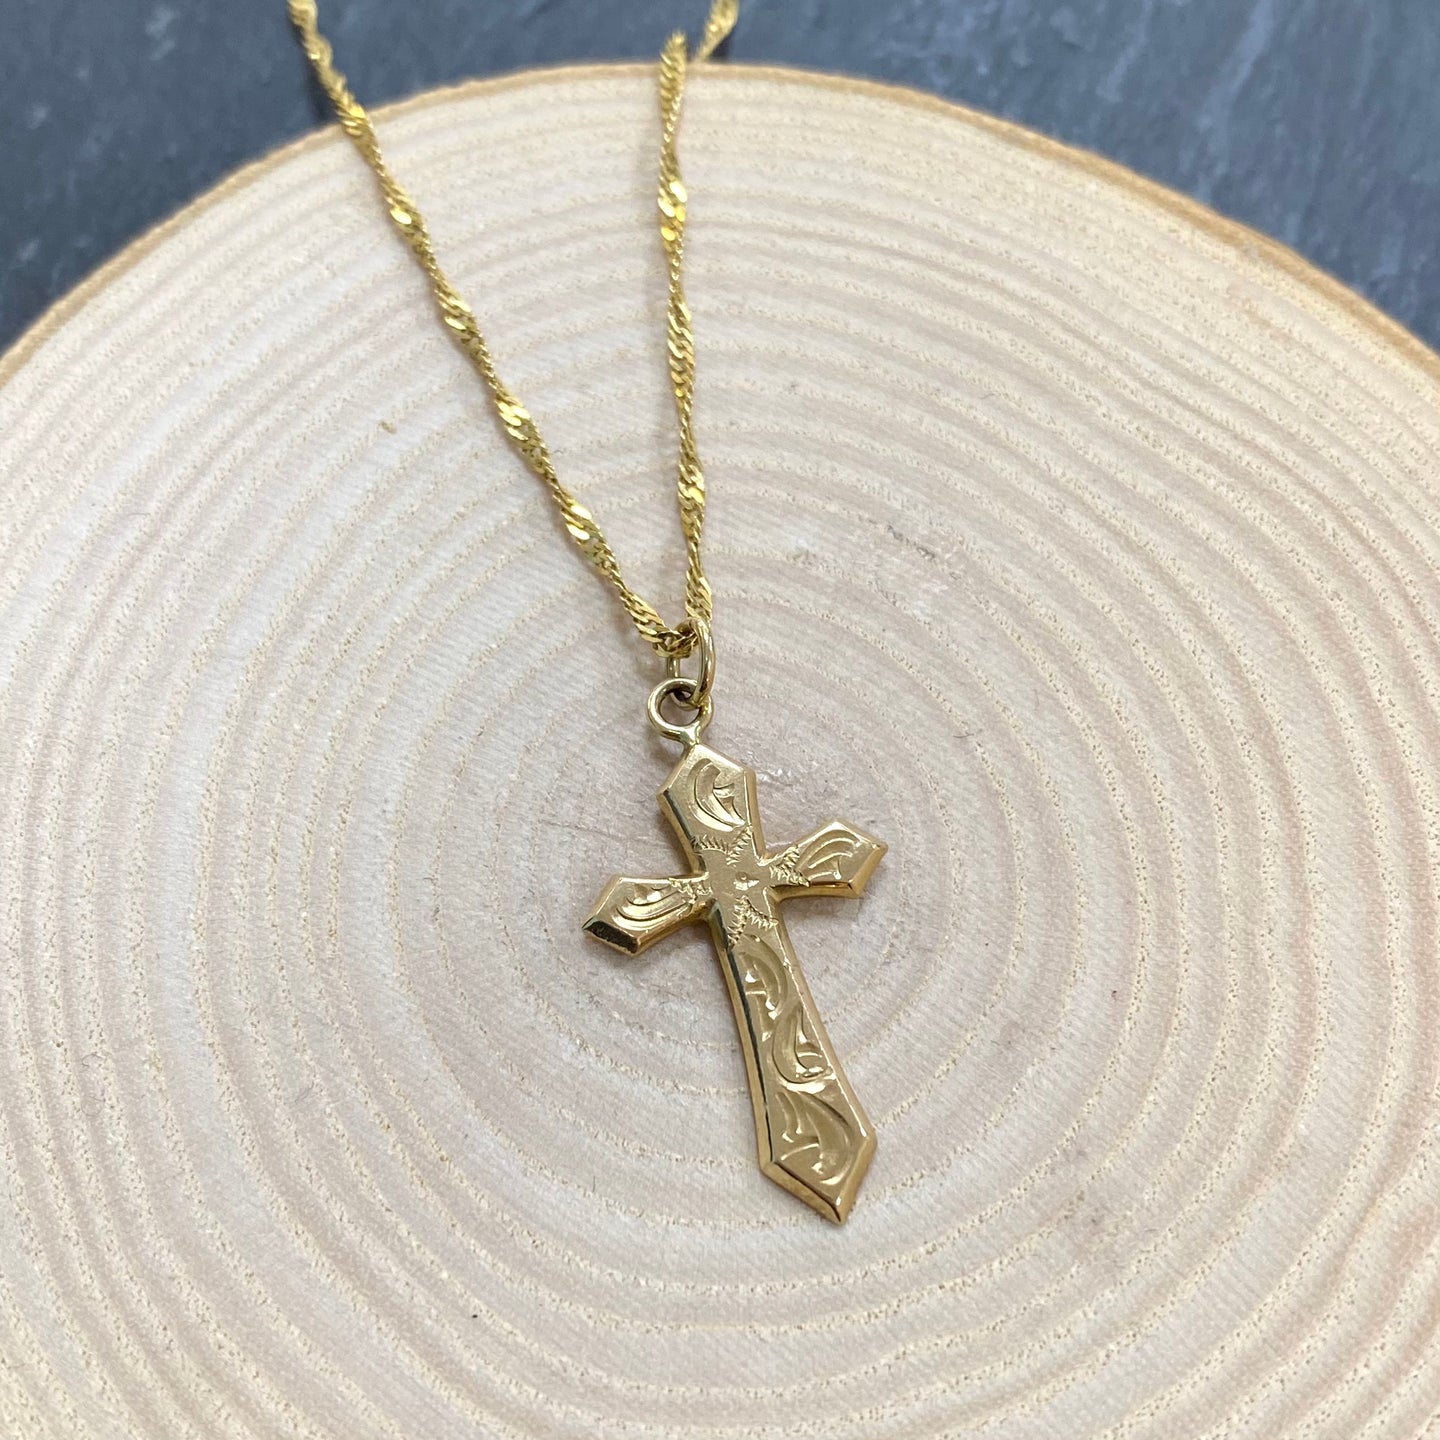 Preloved 9ct Yellow Gold Engraved Cross Pendant and Chain